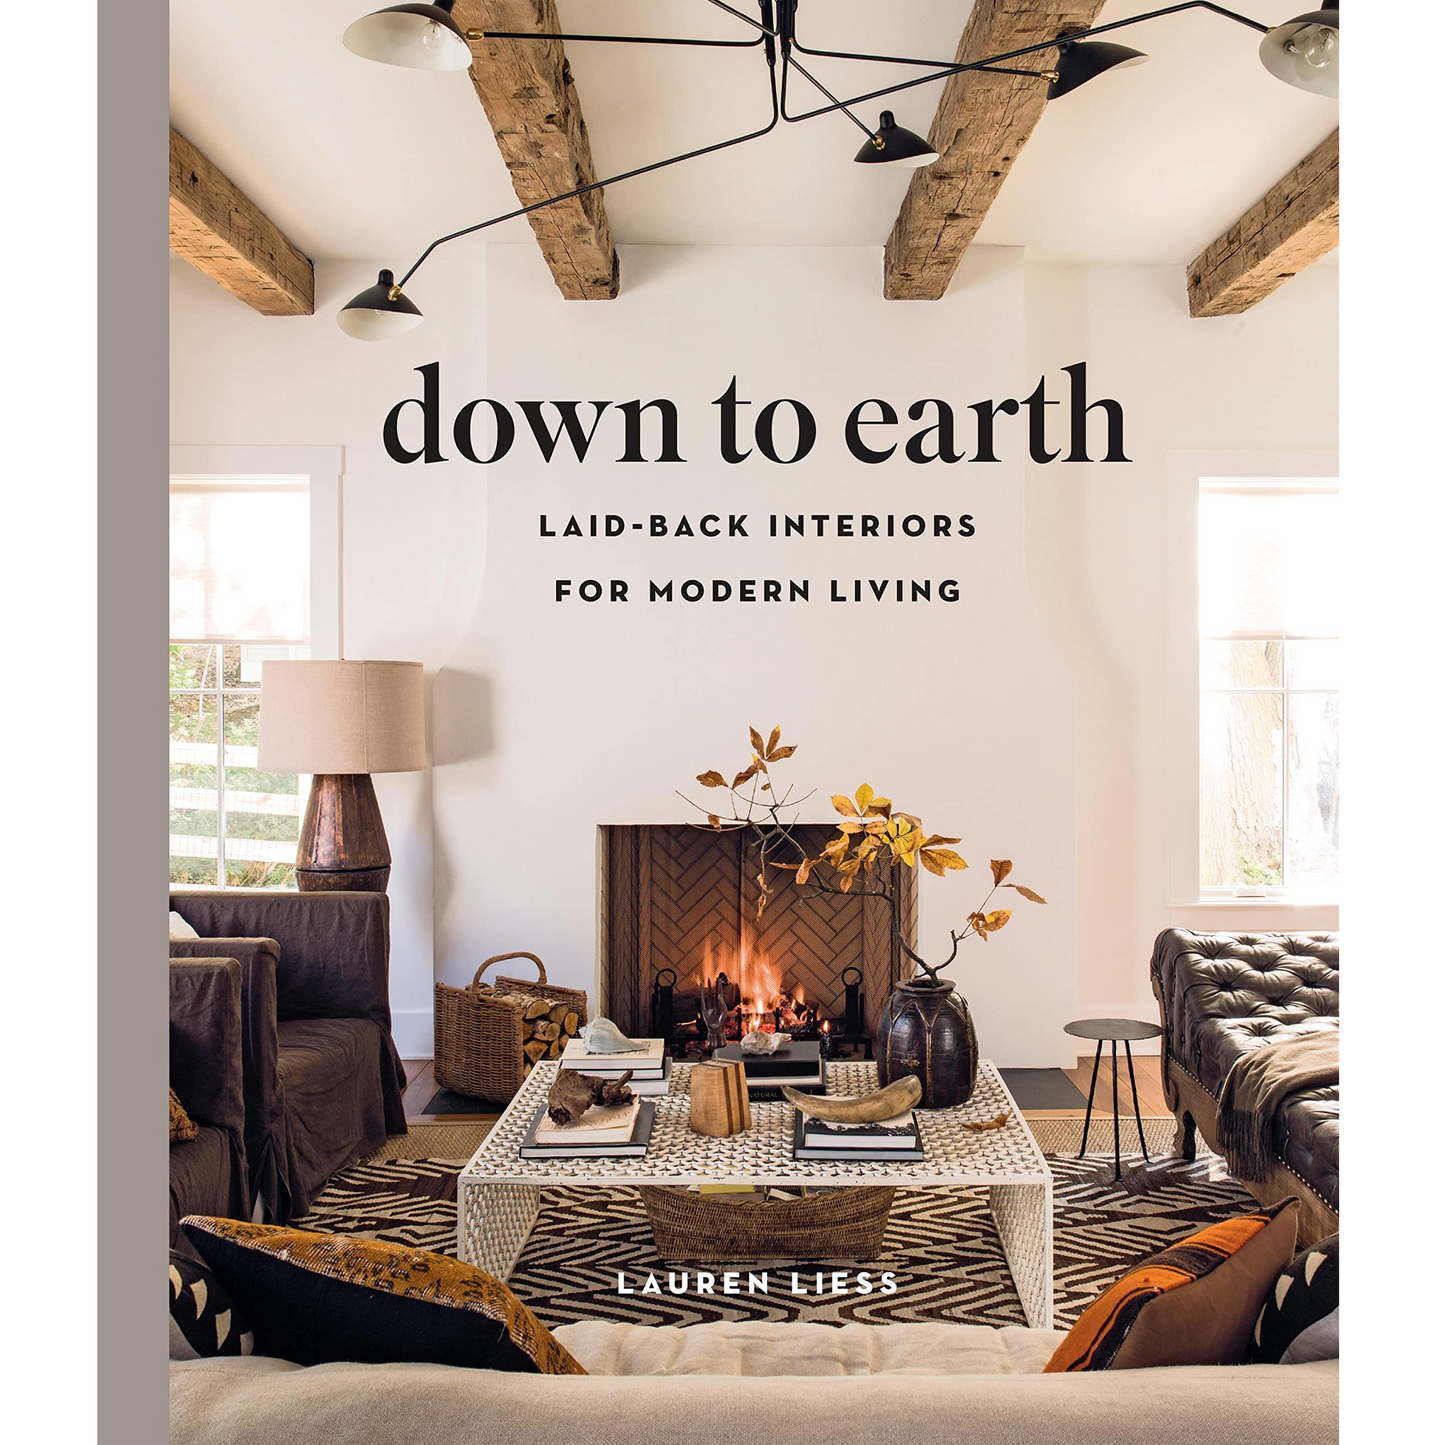 Down To Earth-Laid Back Interiors for Modern Living by Lauren Leiss